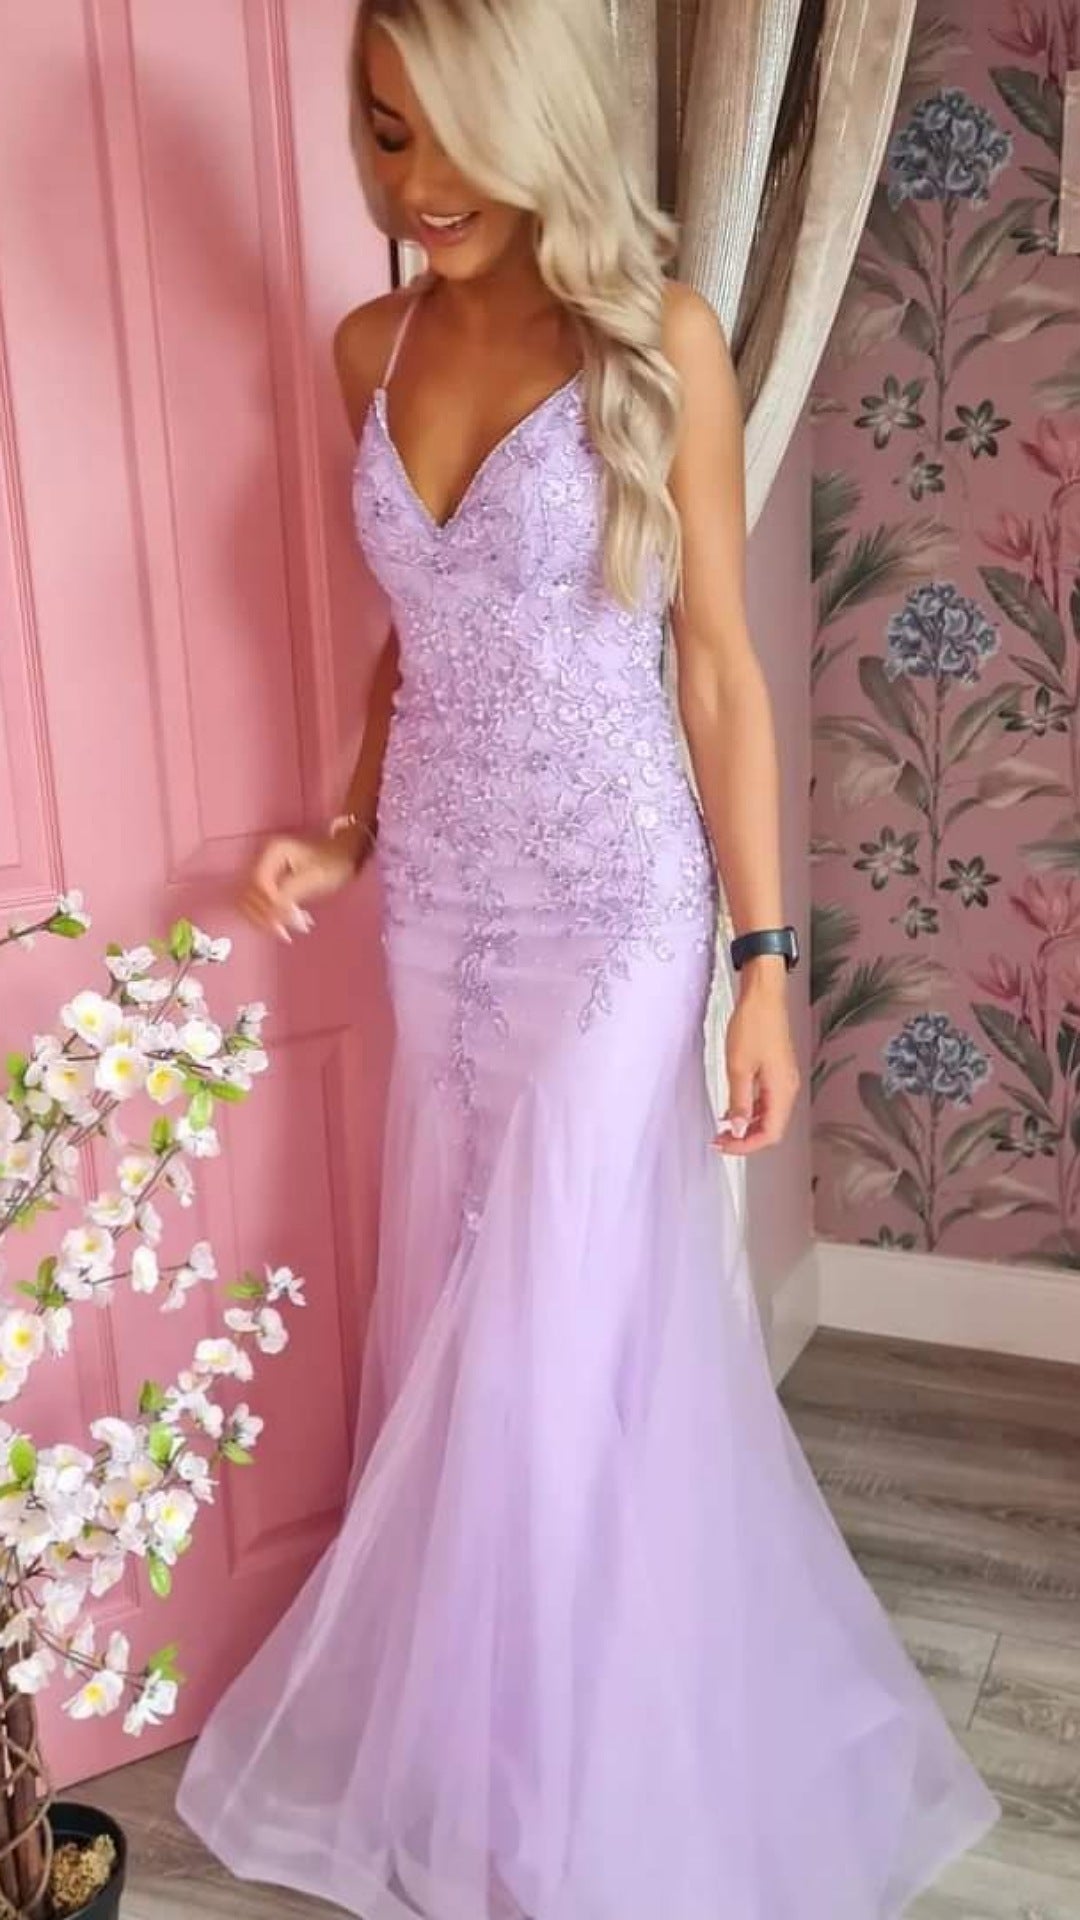 Natasha Lilac Embroidered Bodice With Laced Back Formal Prom Dress